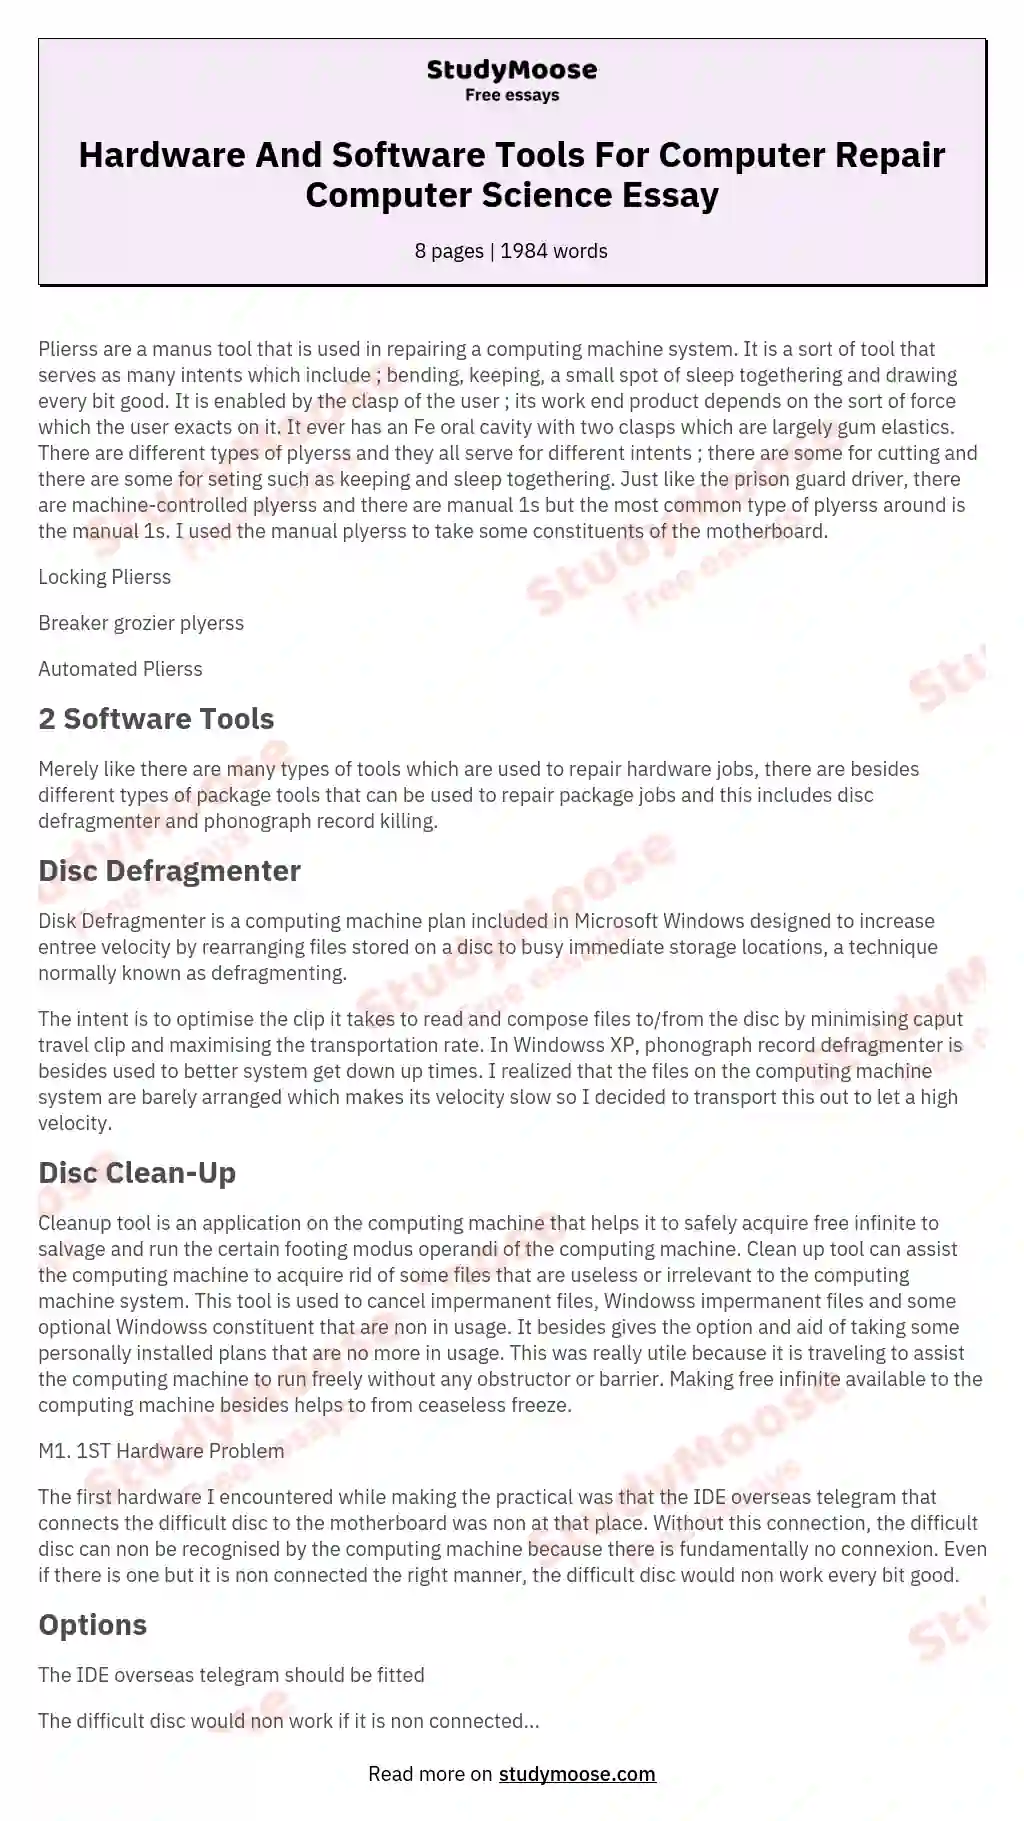 Hardware And Software Tools For Computer Repair Computer Science Essay